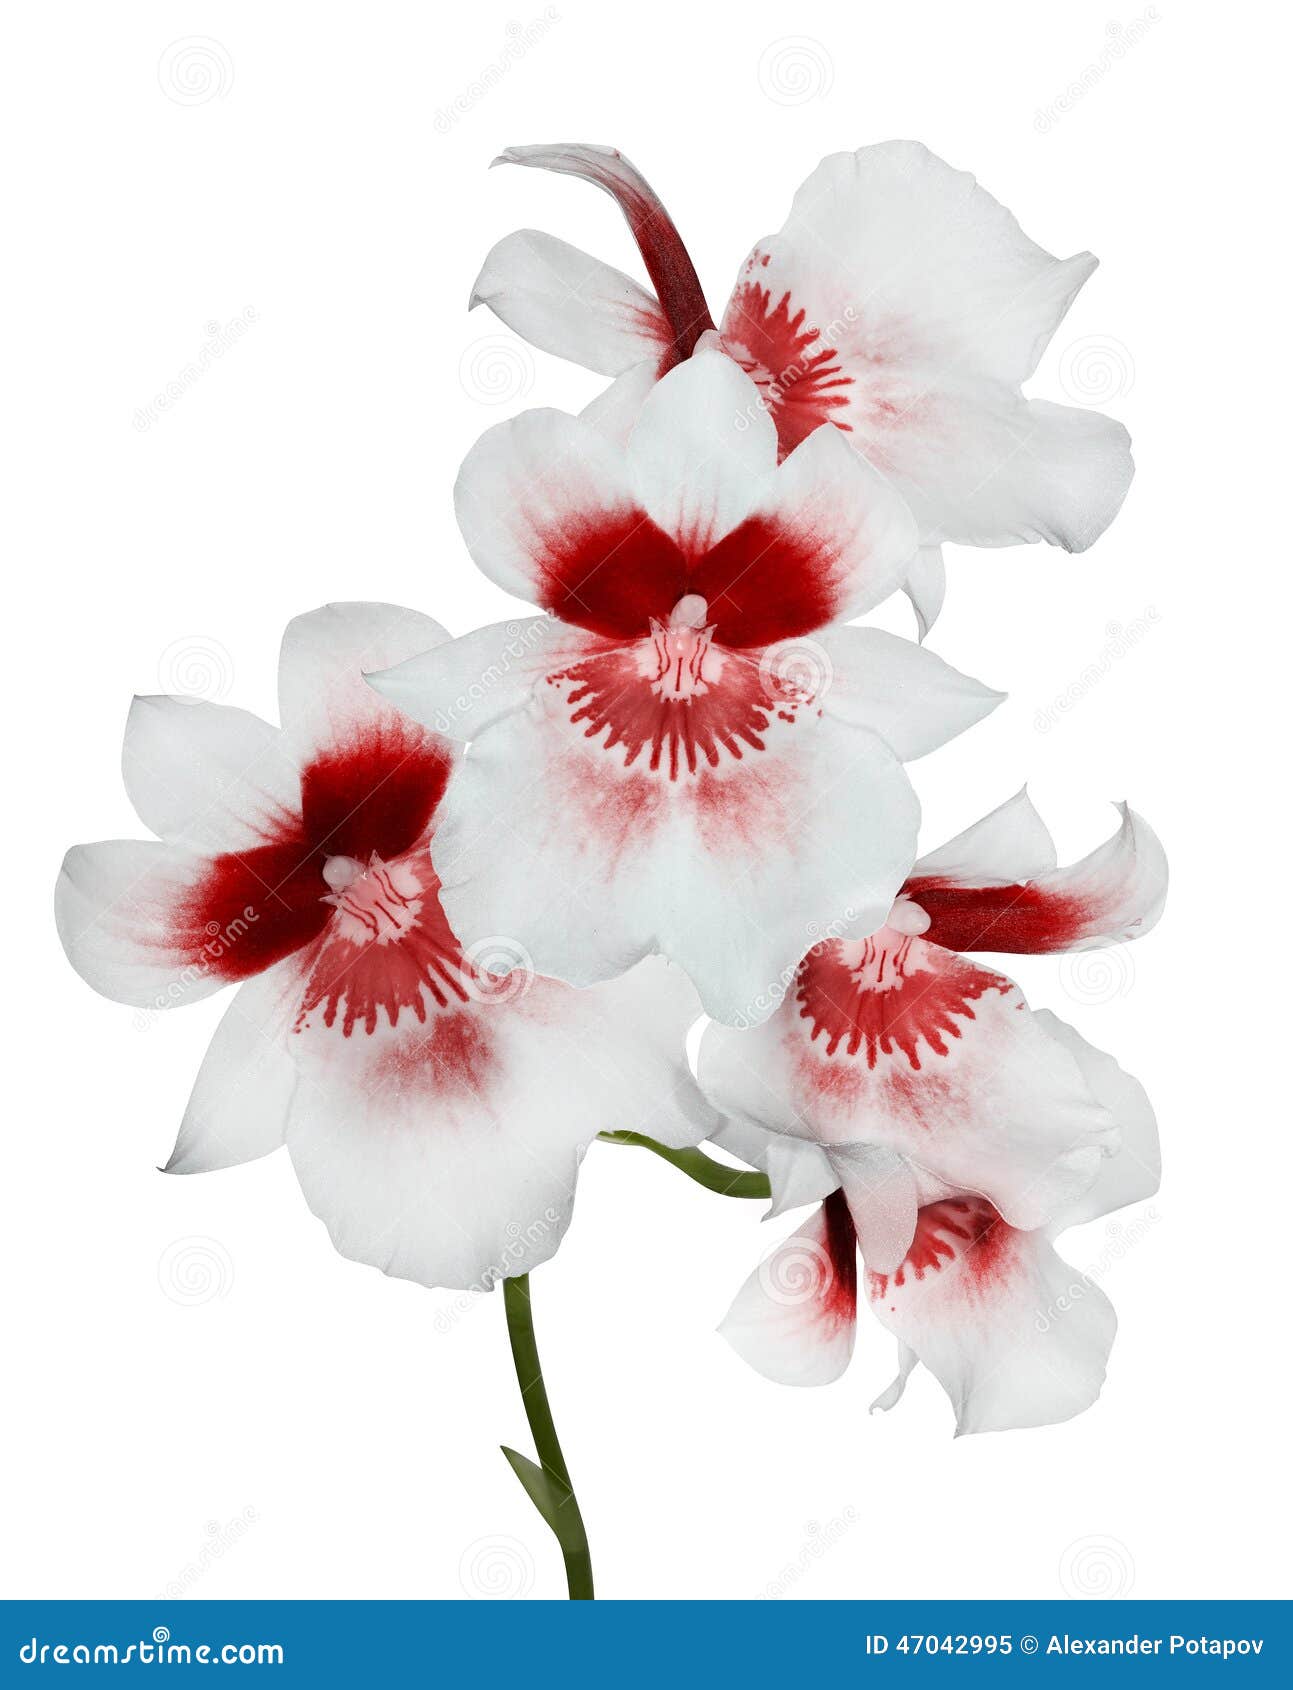 Five White Orchid Flowers with Red Center Stock Image - Image of nature,  plant: 47042995